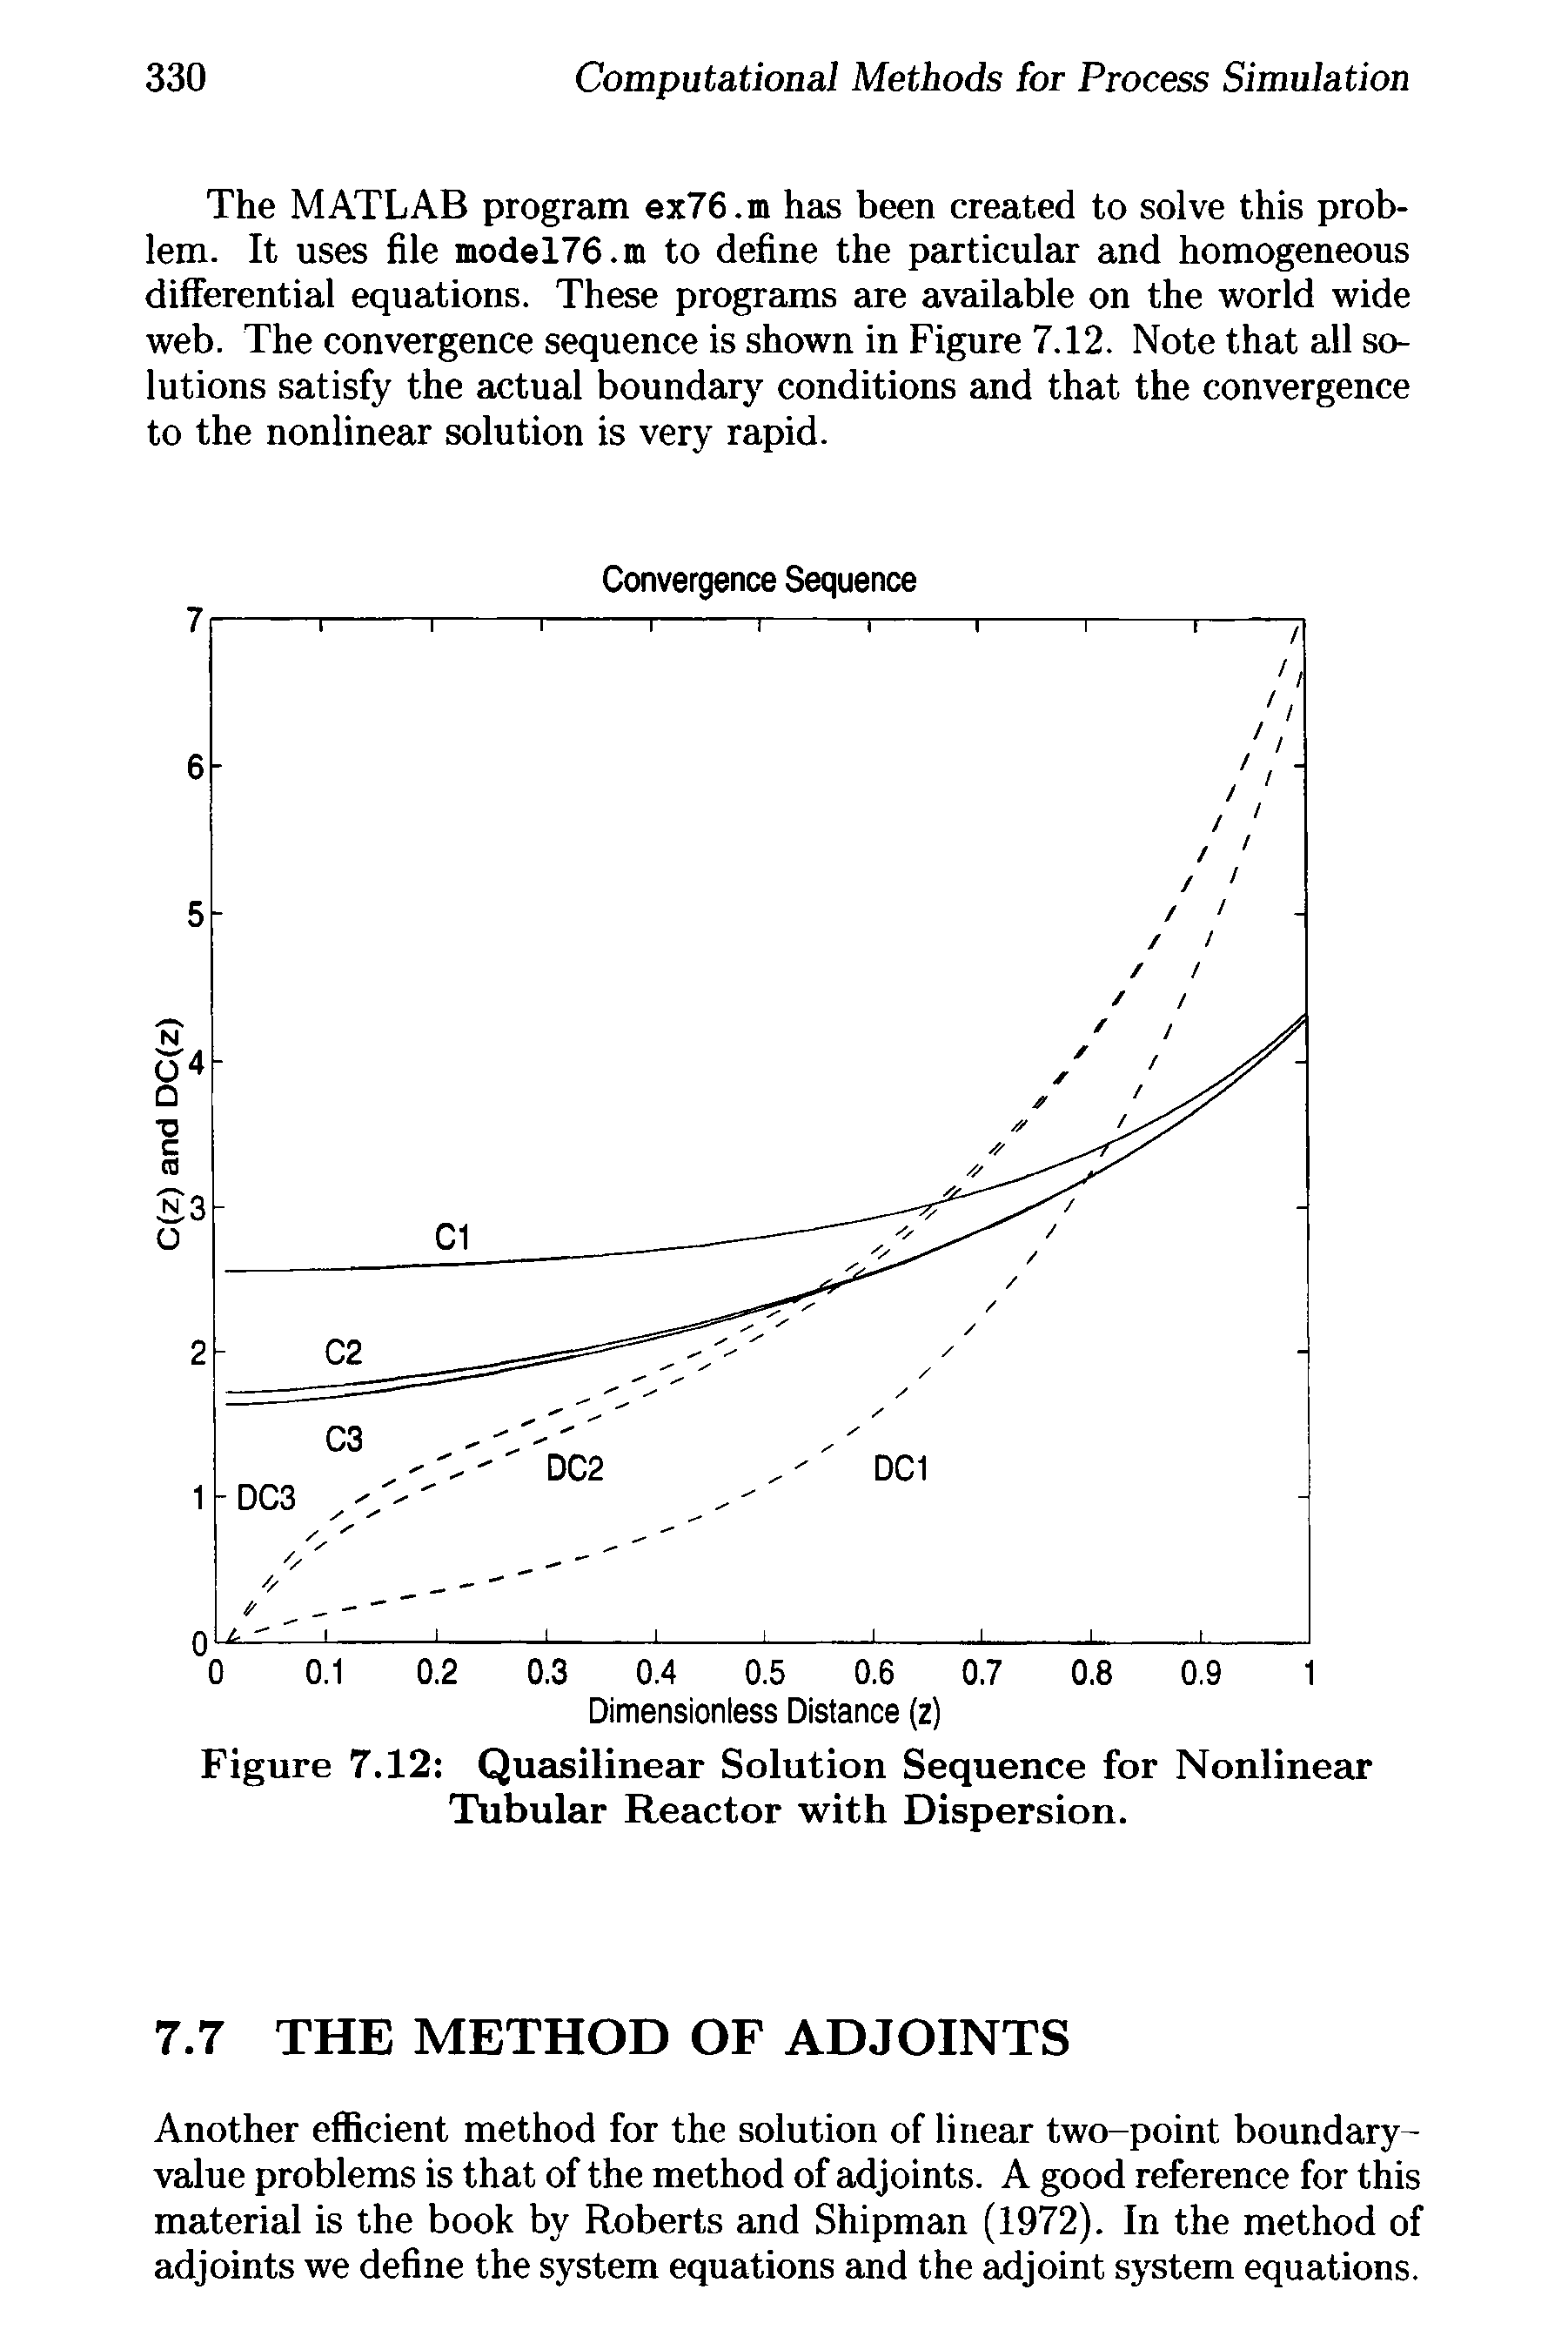 Figure 7.12 Quasilinear Solution Sequence for Nonlinear Tubular Reactor with Dispersion.